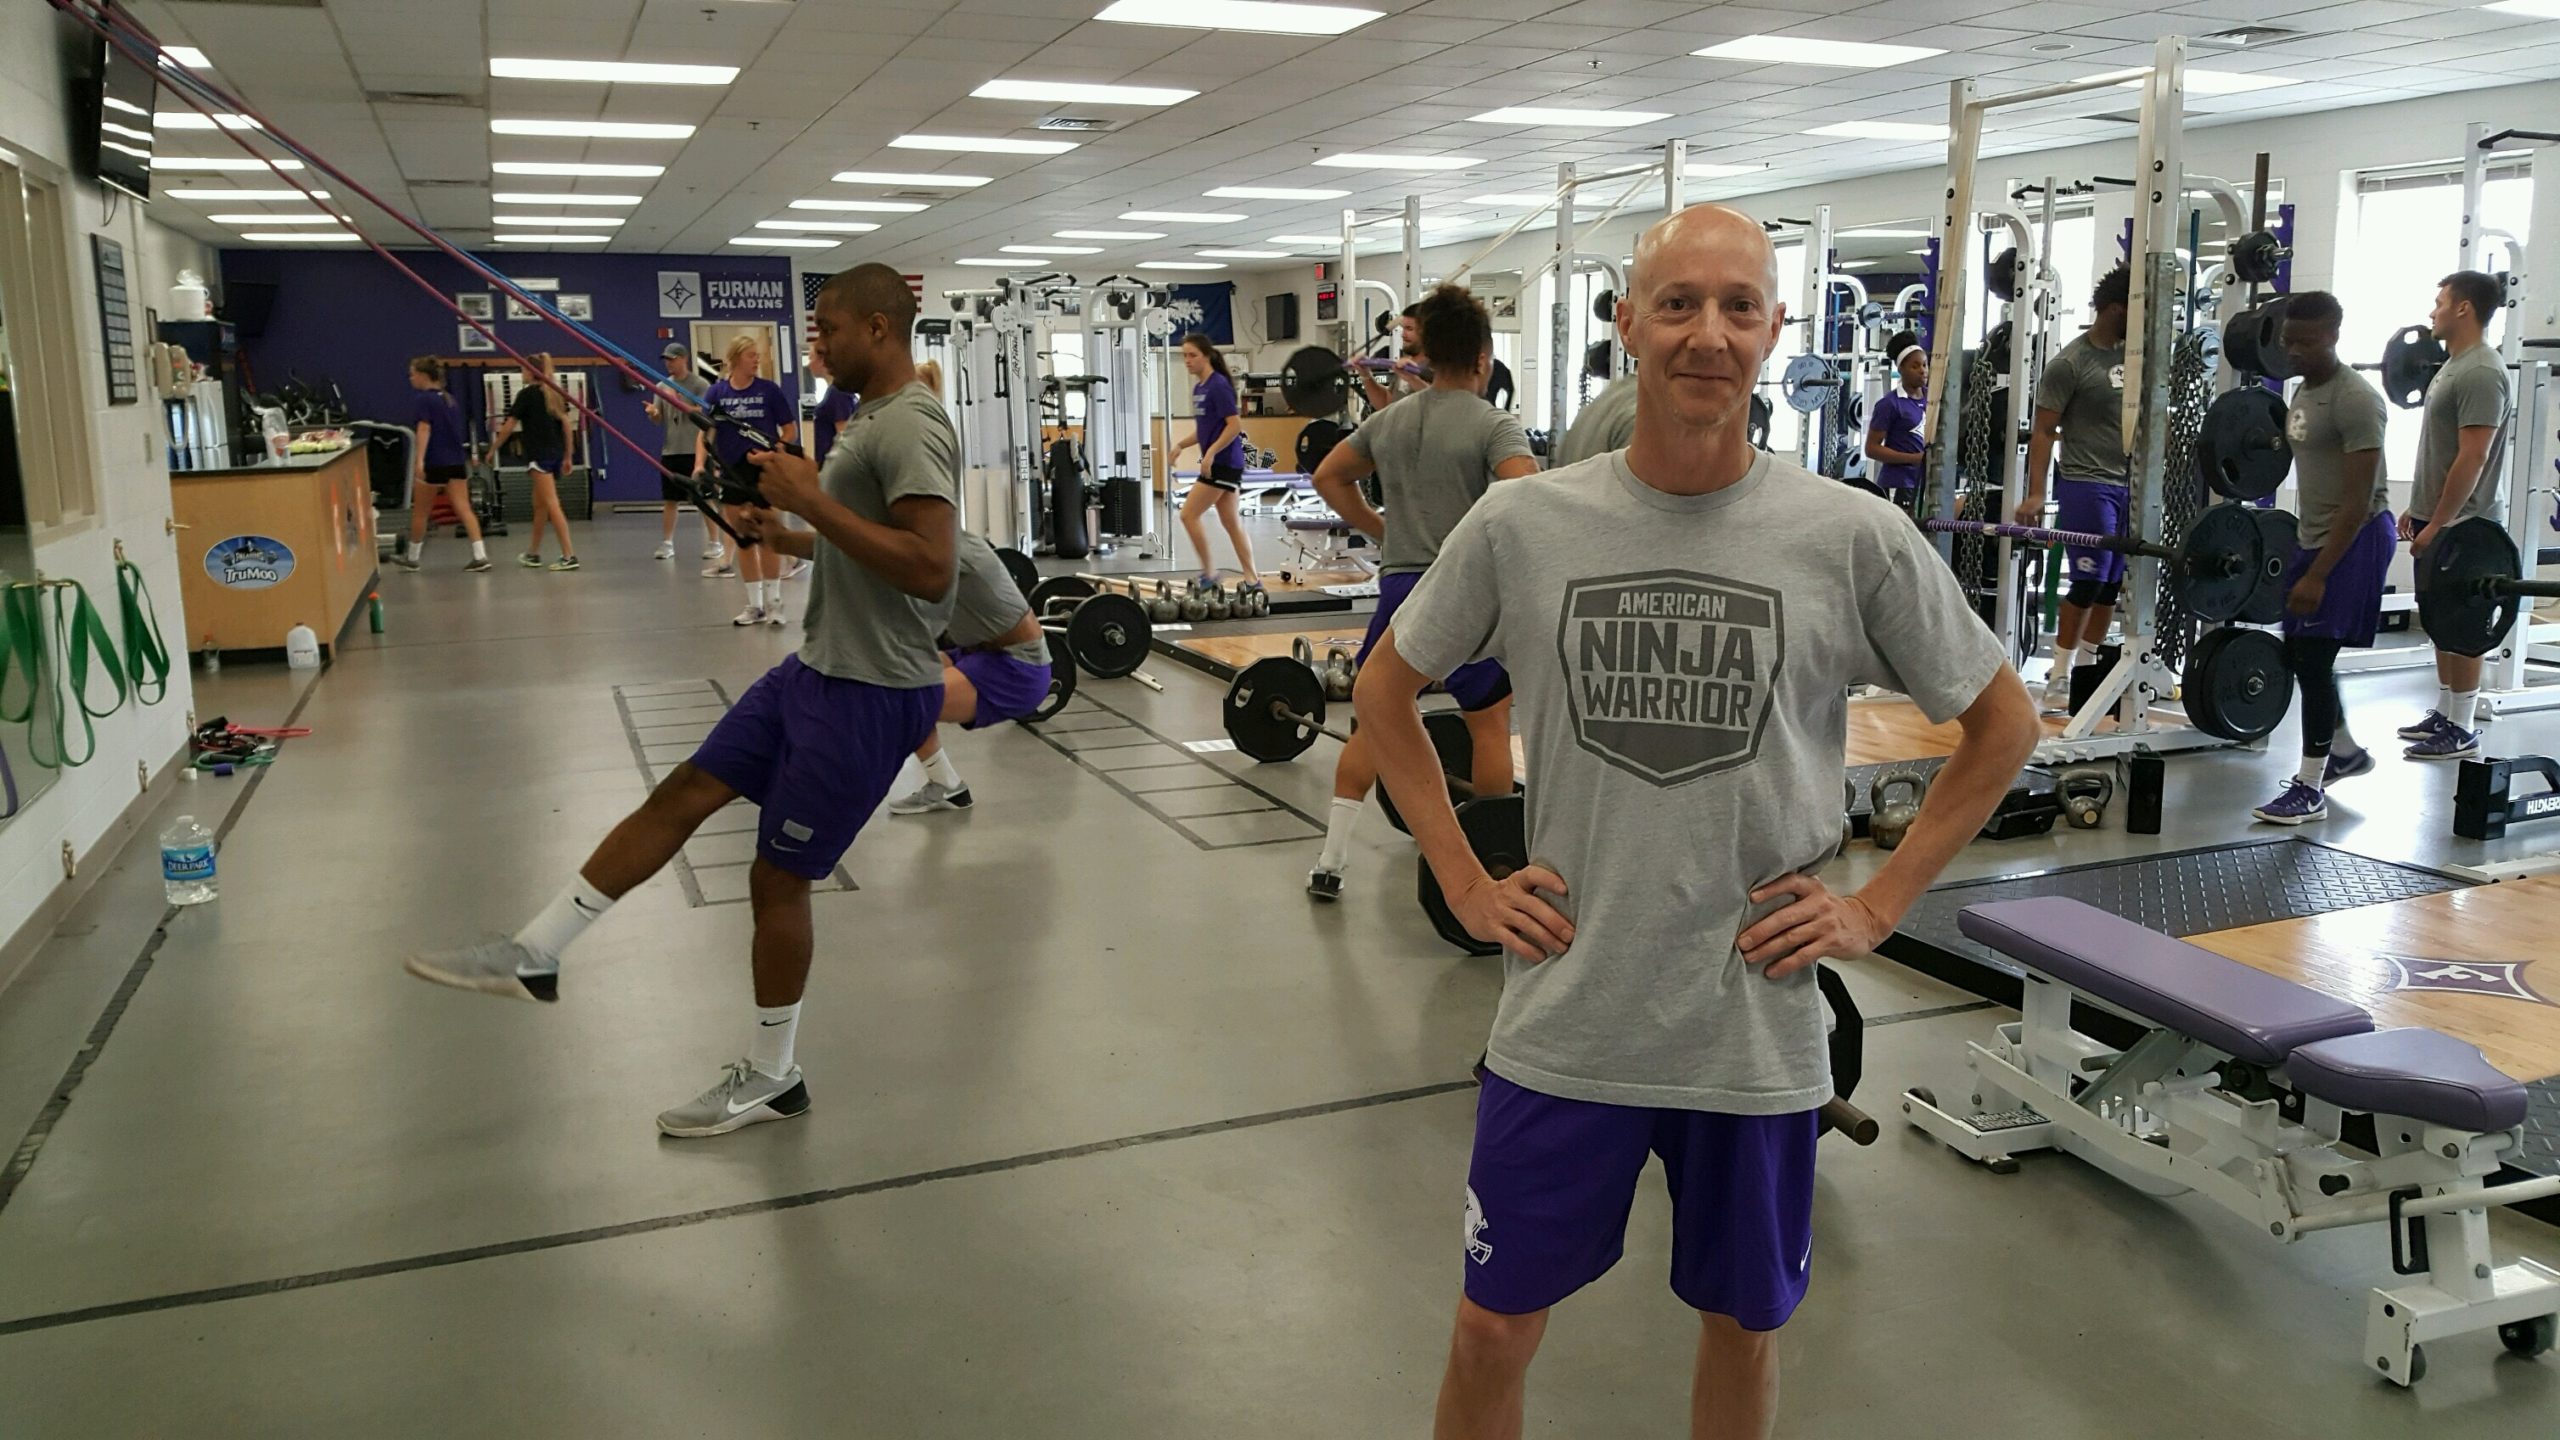 Furman fan Bootie Cothran trains in the weight room at Timmons Arena to prepare for "American Ninja Warrior."